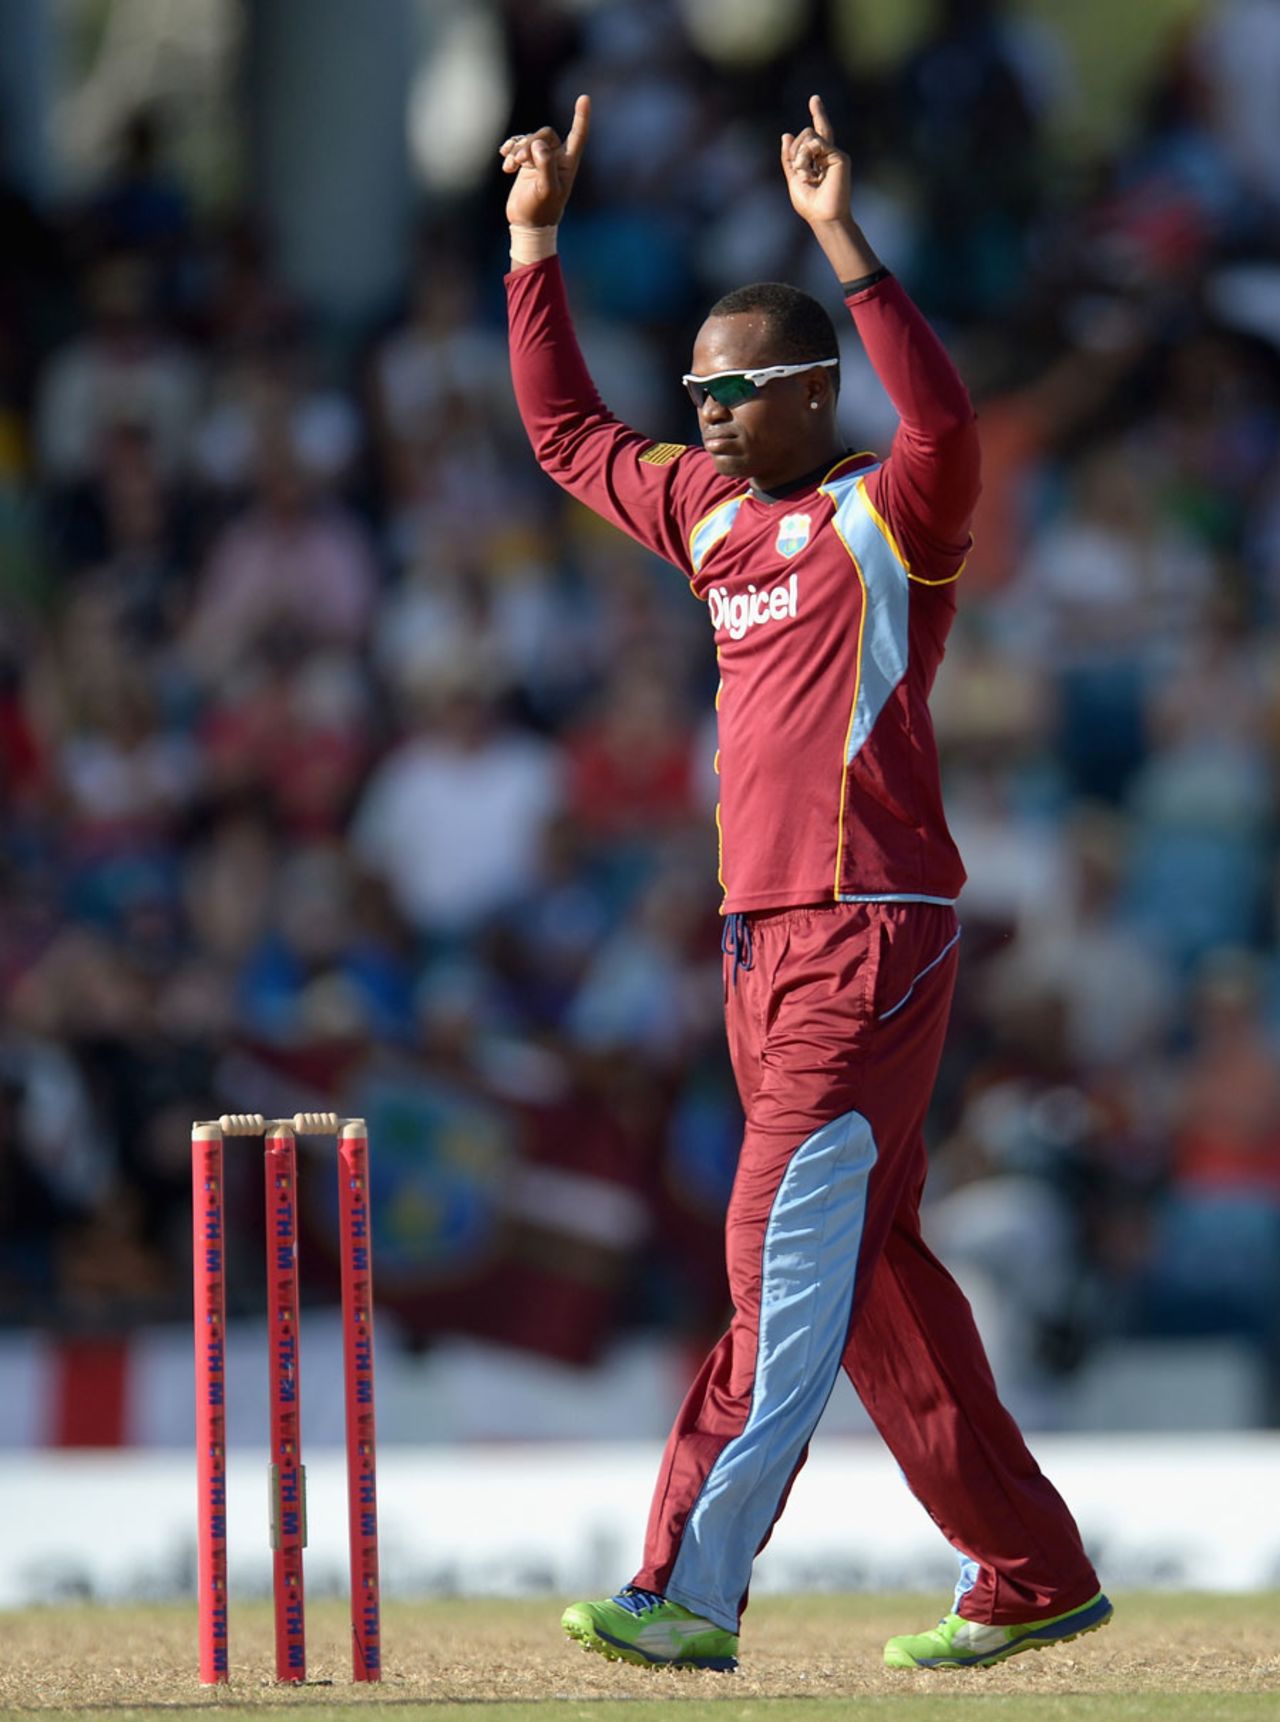 Marlon Samuels followed up his runs with key wickets, West Indies v England, 1st T20, Barbados, March 9, 2014